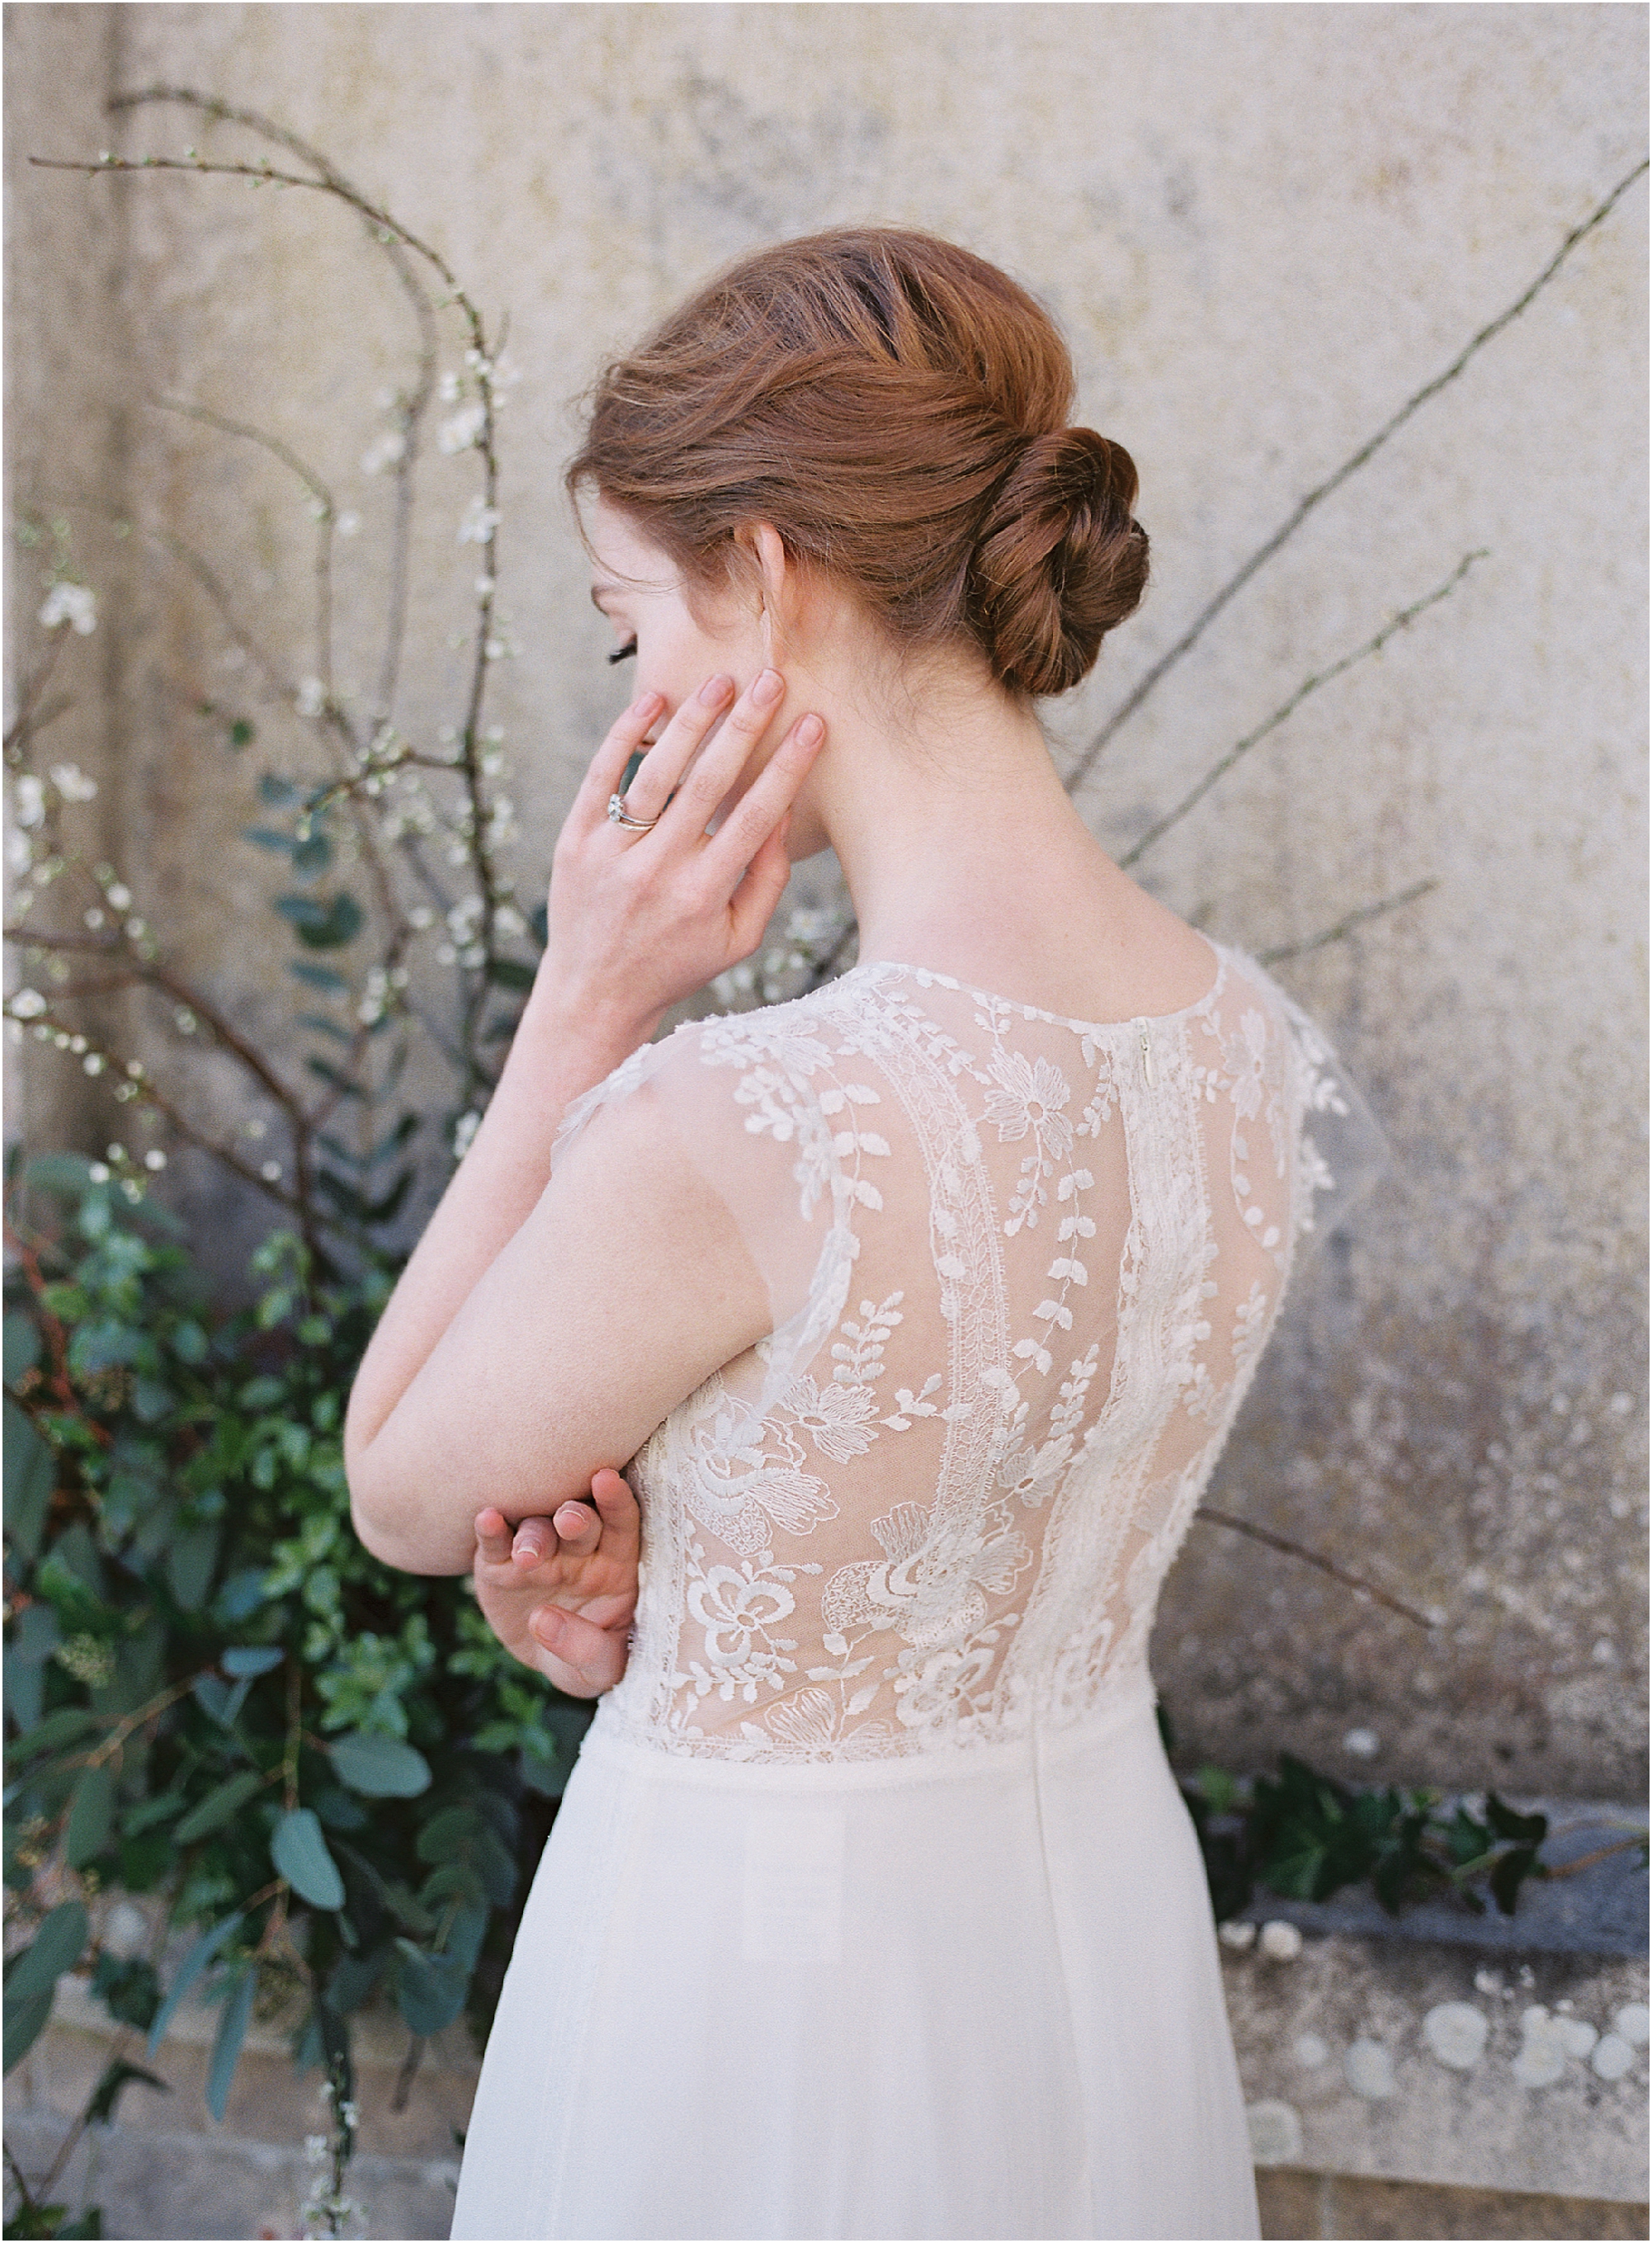 Romantic ed haired bride with lace wedding dress